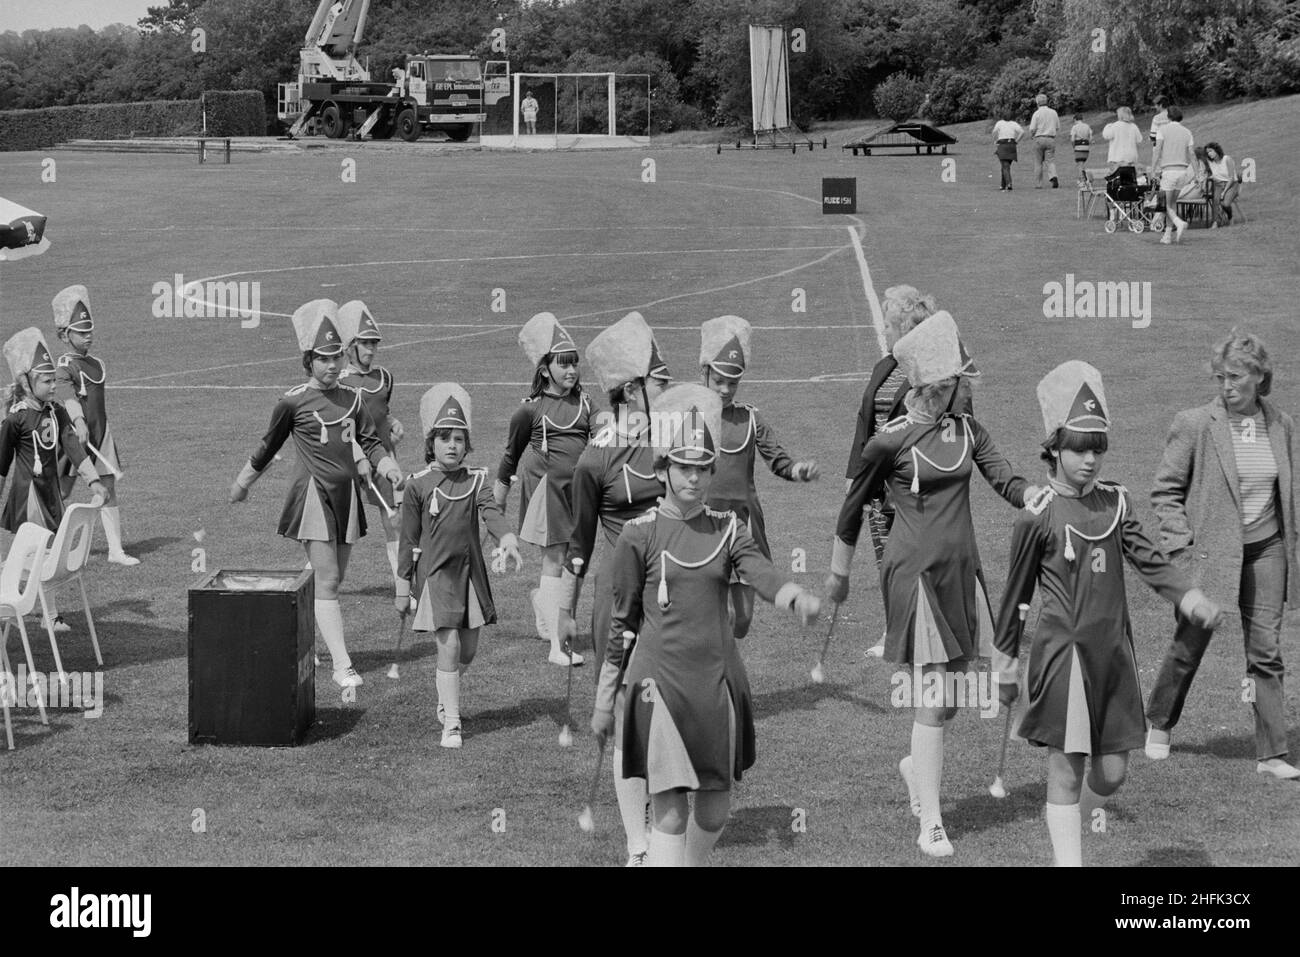 Laing Sports Ground, Rowley Lane, Elstree, Barnet, London, 30/06/1984. A troop of drum majorettes march away from the football pitch after their performance for Gala Day at Laing's Elstree Sports Club. Stock Photo